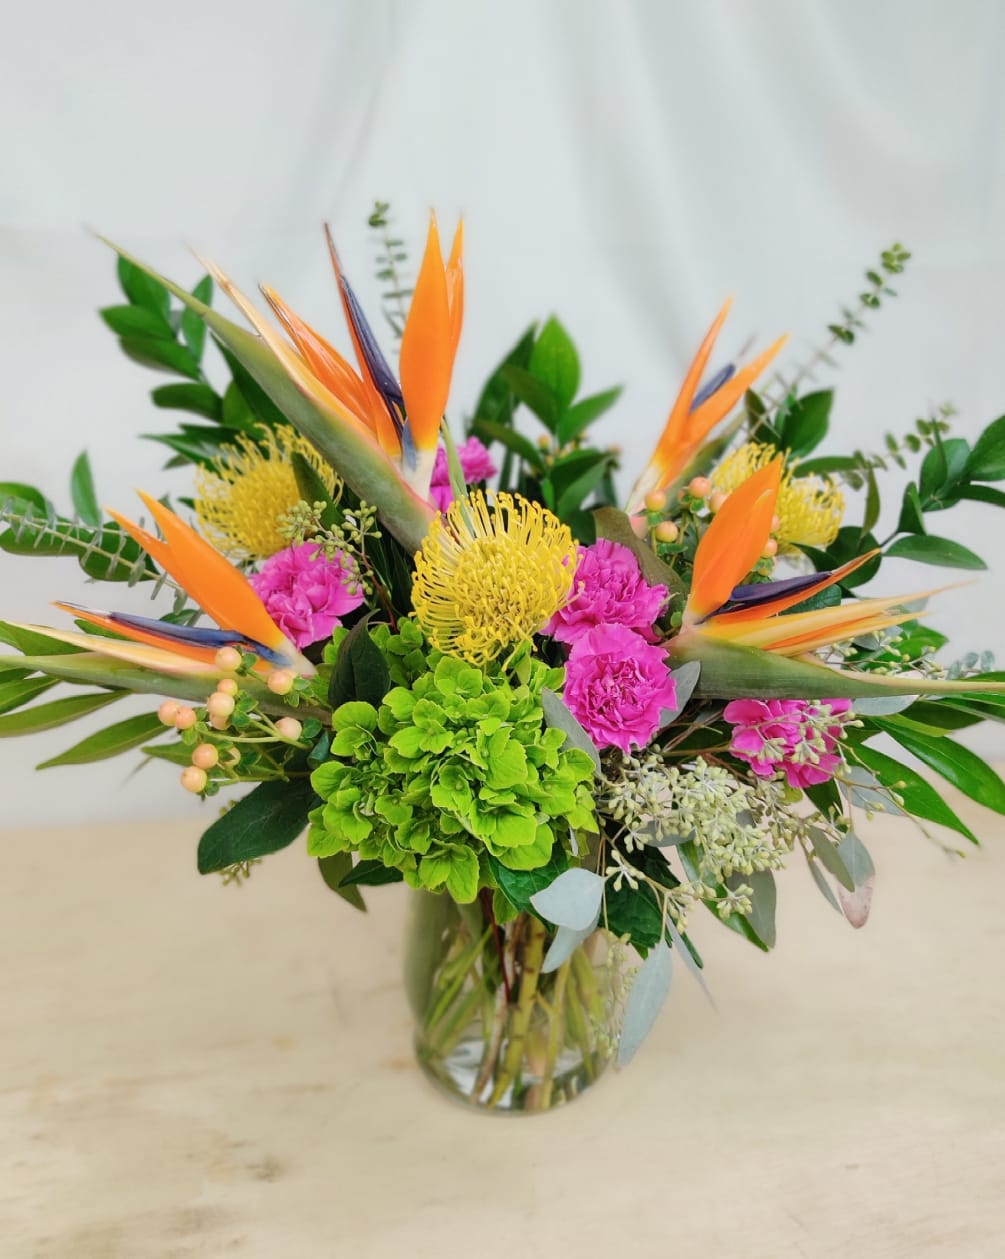 Assorted vibrant mix of colors and textures. This fun arrangement has spunky